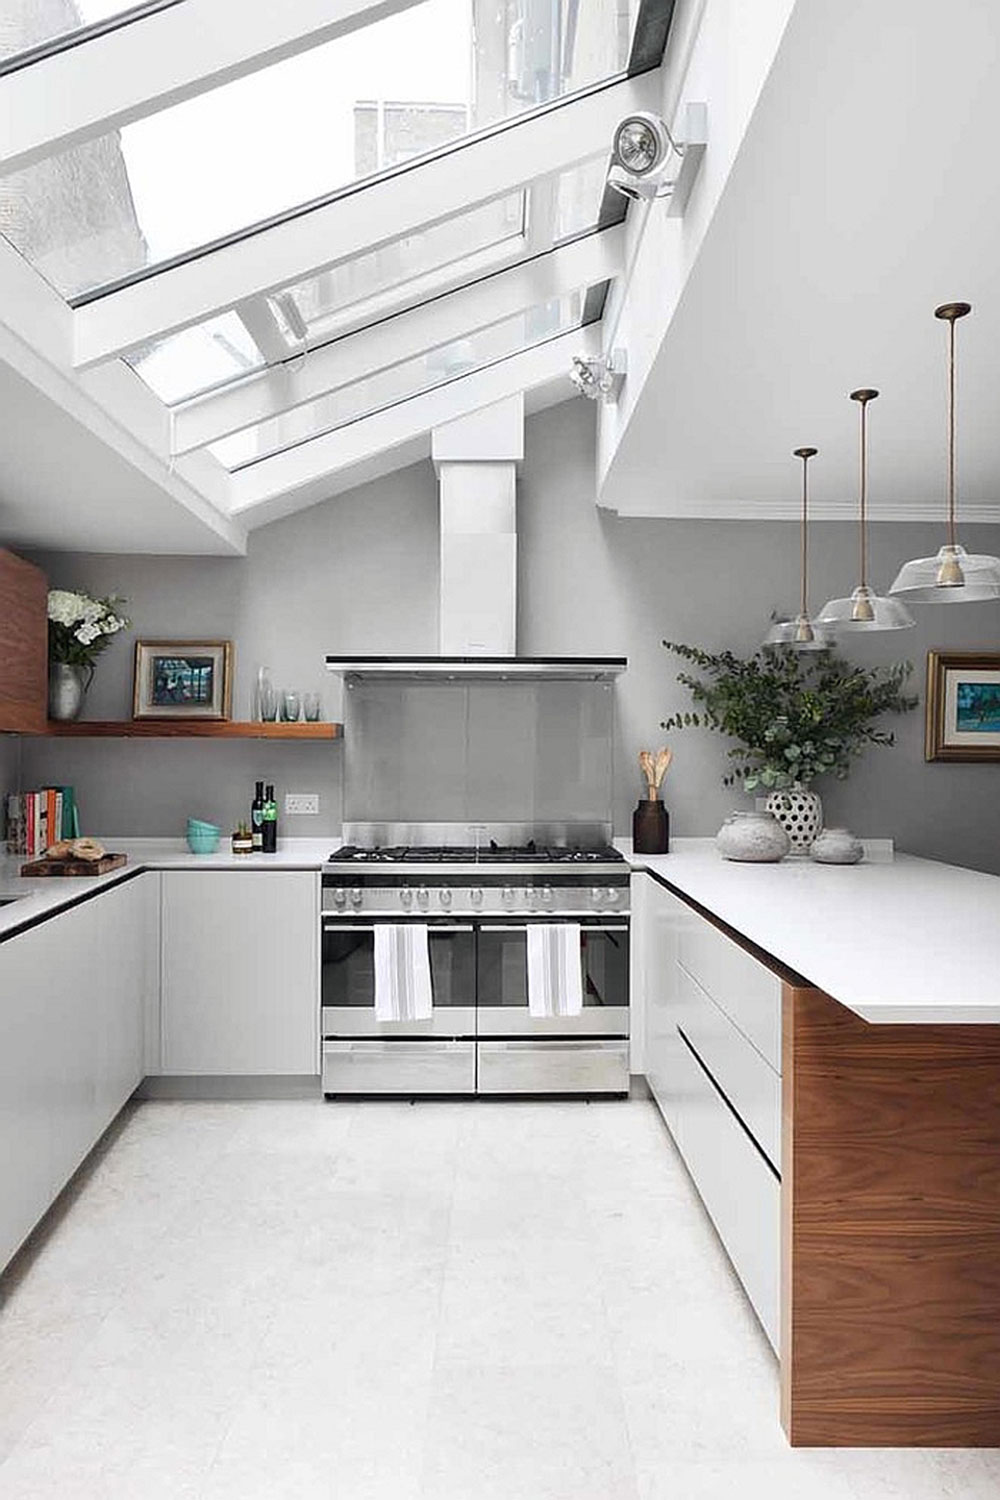 Kitchens with skylights for more natural light 6 kitchens with skylights for more natural light